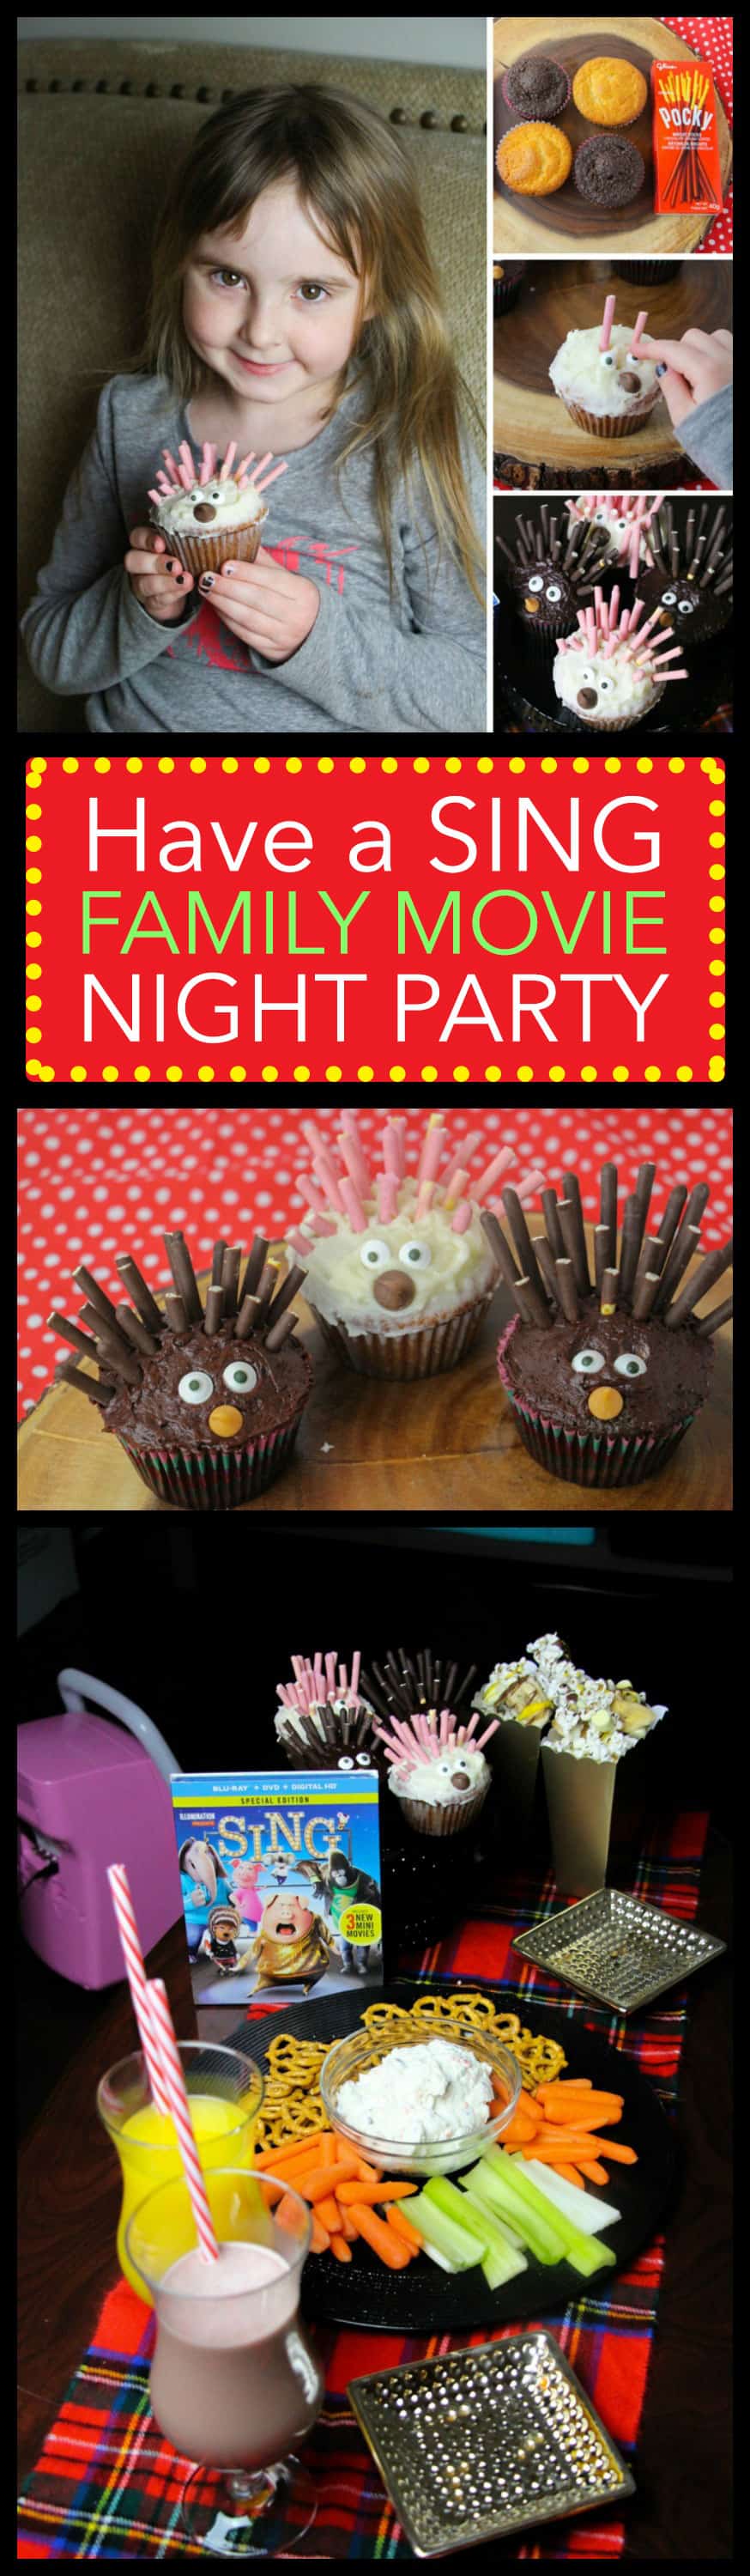 SING Special Edition is now out on DVD and Blu-Ray, so we made porcupine cupcakes, gorilla munch popcorn and several other goodies inspired by SING for family movie night! #SingMovie #SingSquad #Sponsored